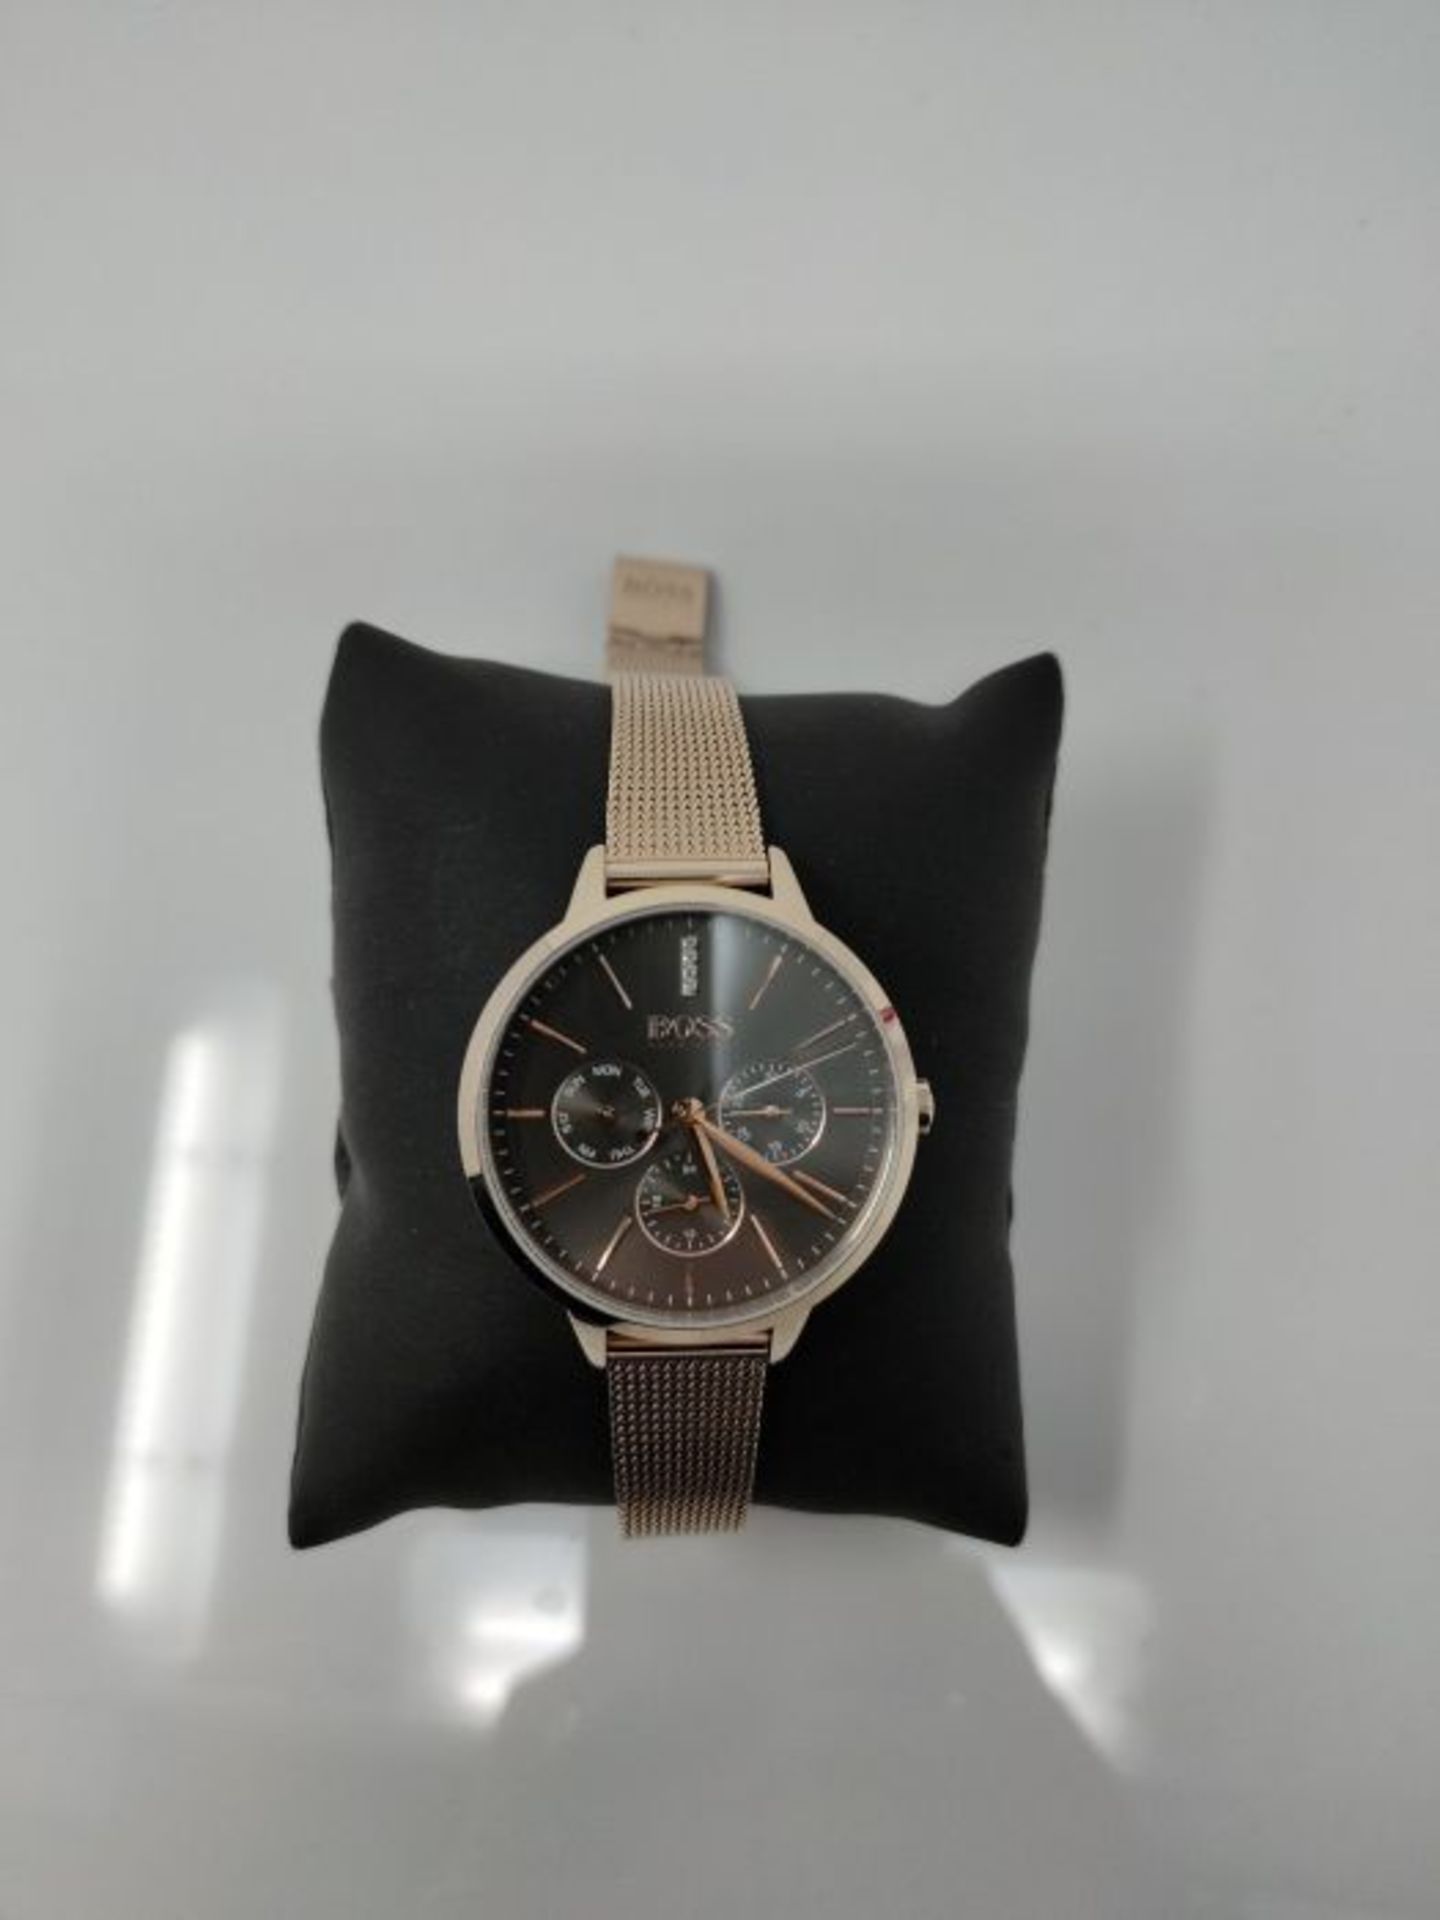 RRP £145.00 BOSS Unisex-Adult Multi dial Quartz Watch with Stainless Steel Strap 1502424 - Image 2 of 2